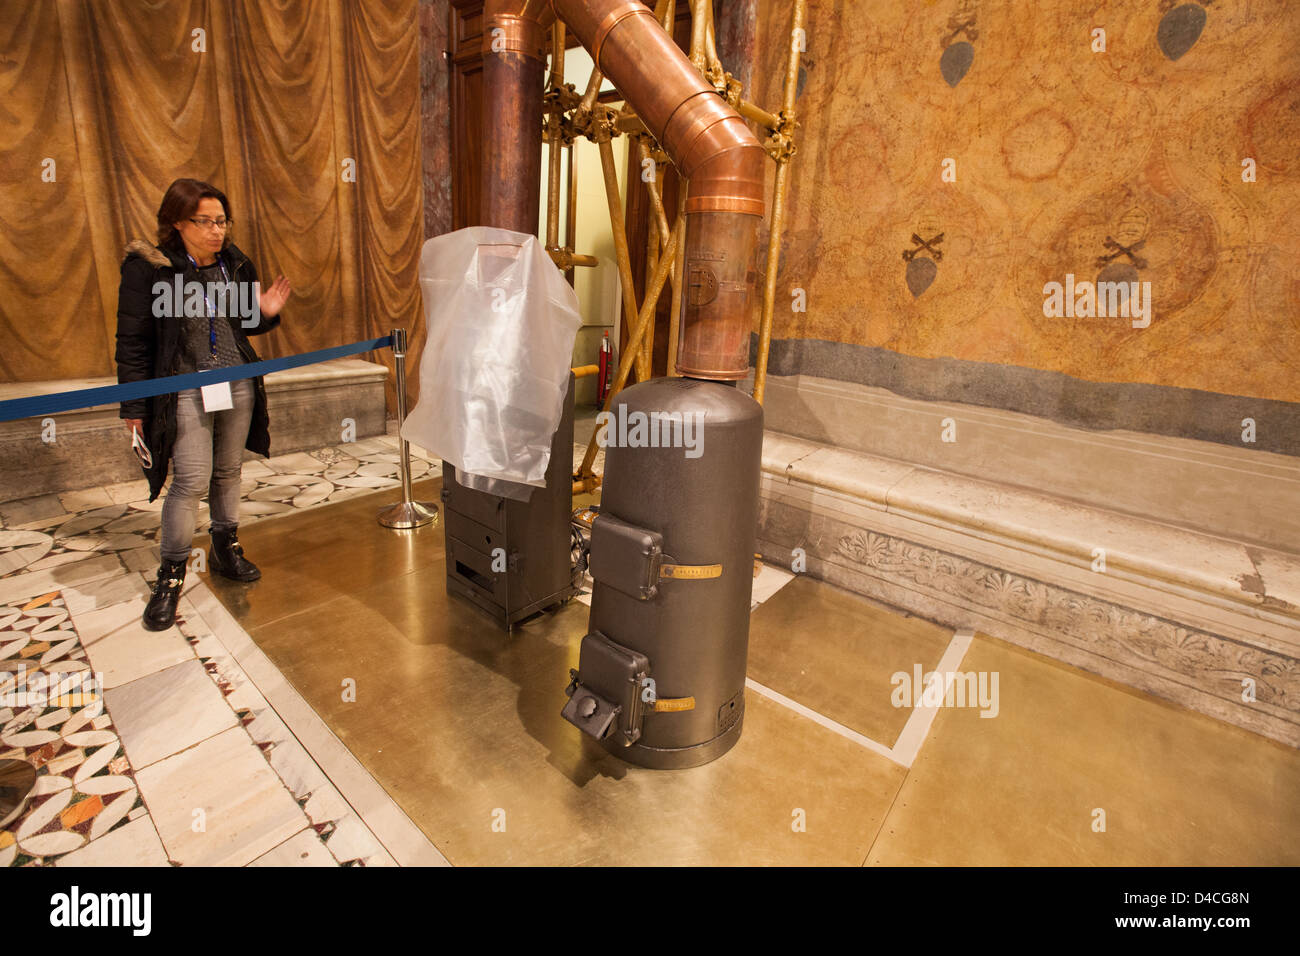 Rome, Vatican. 9th March 2013 -- Sistine Chapel. The stoves will be used to produce smoke white and dark during the conclave. -- Stock Photo